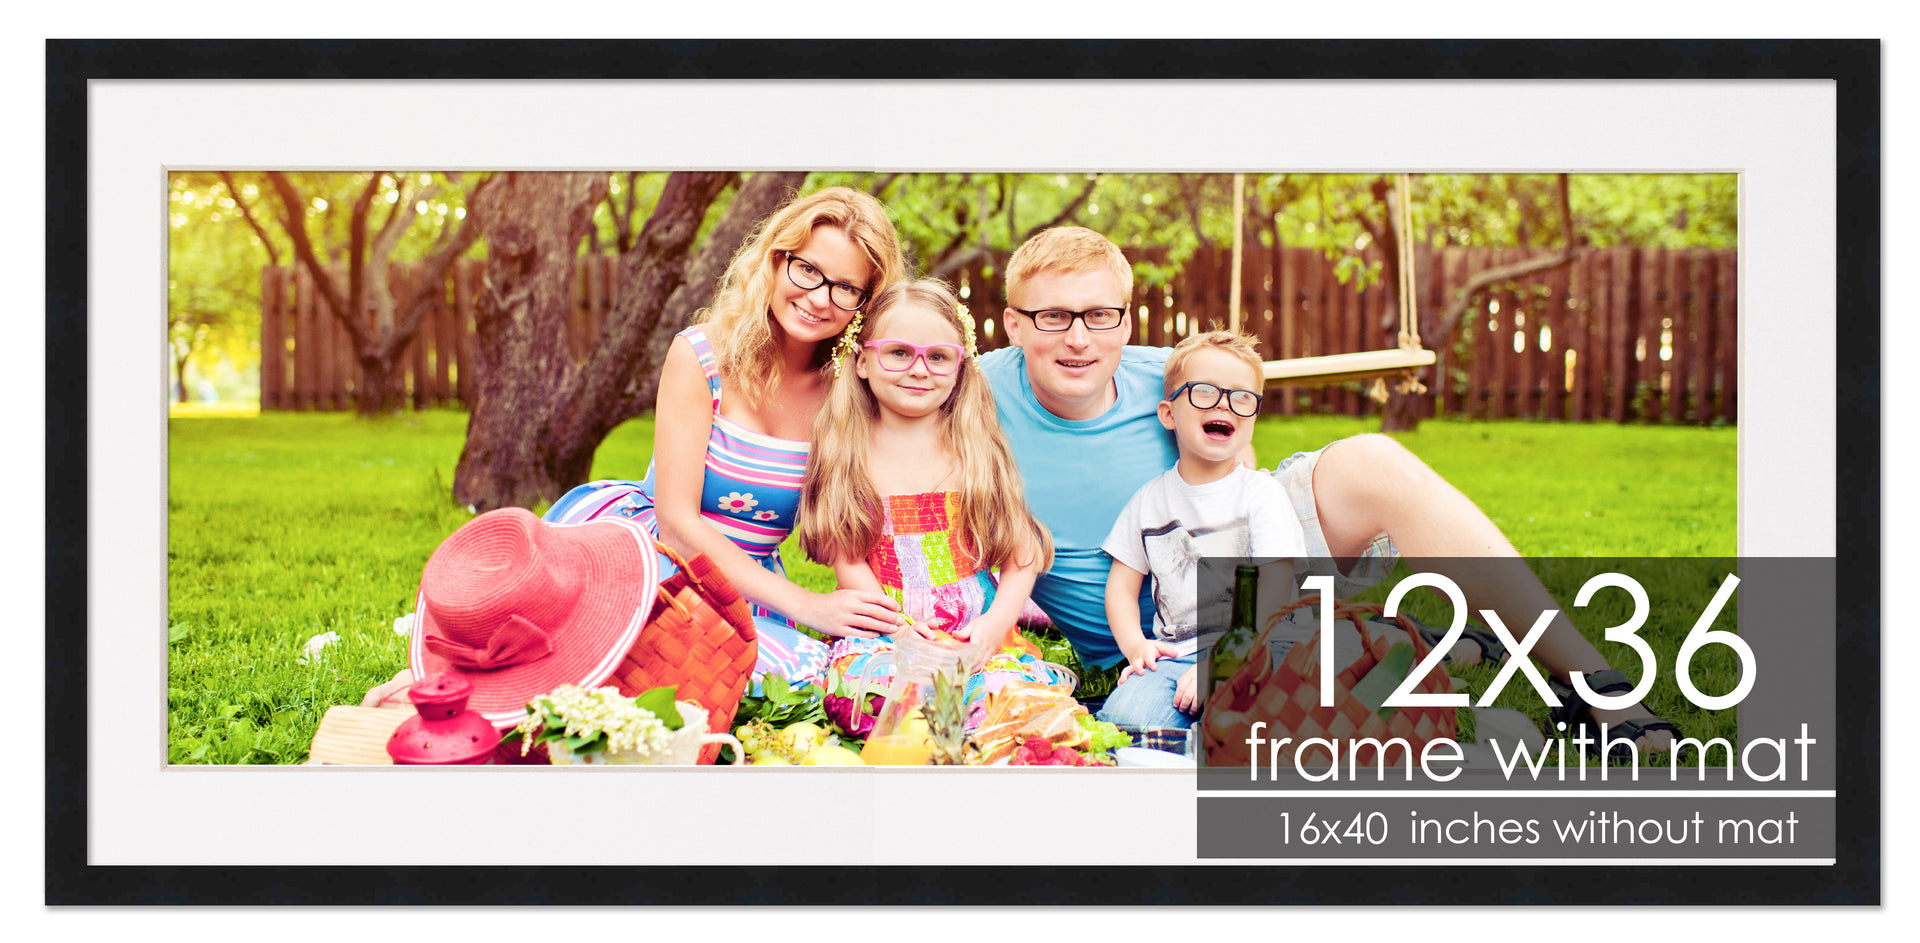 18x18 Frame with Mat - Black 20x20 Frame Wood Made to Display Print or Poster Measuring 18 x 18 Inches with White Photo Mat